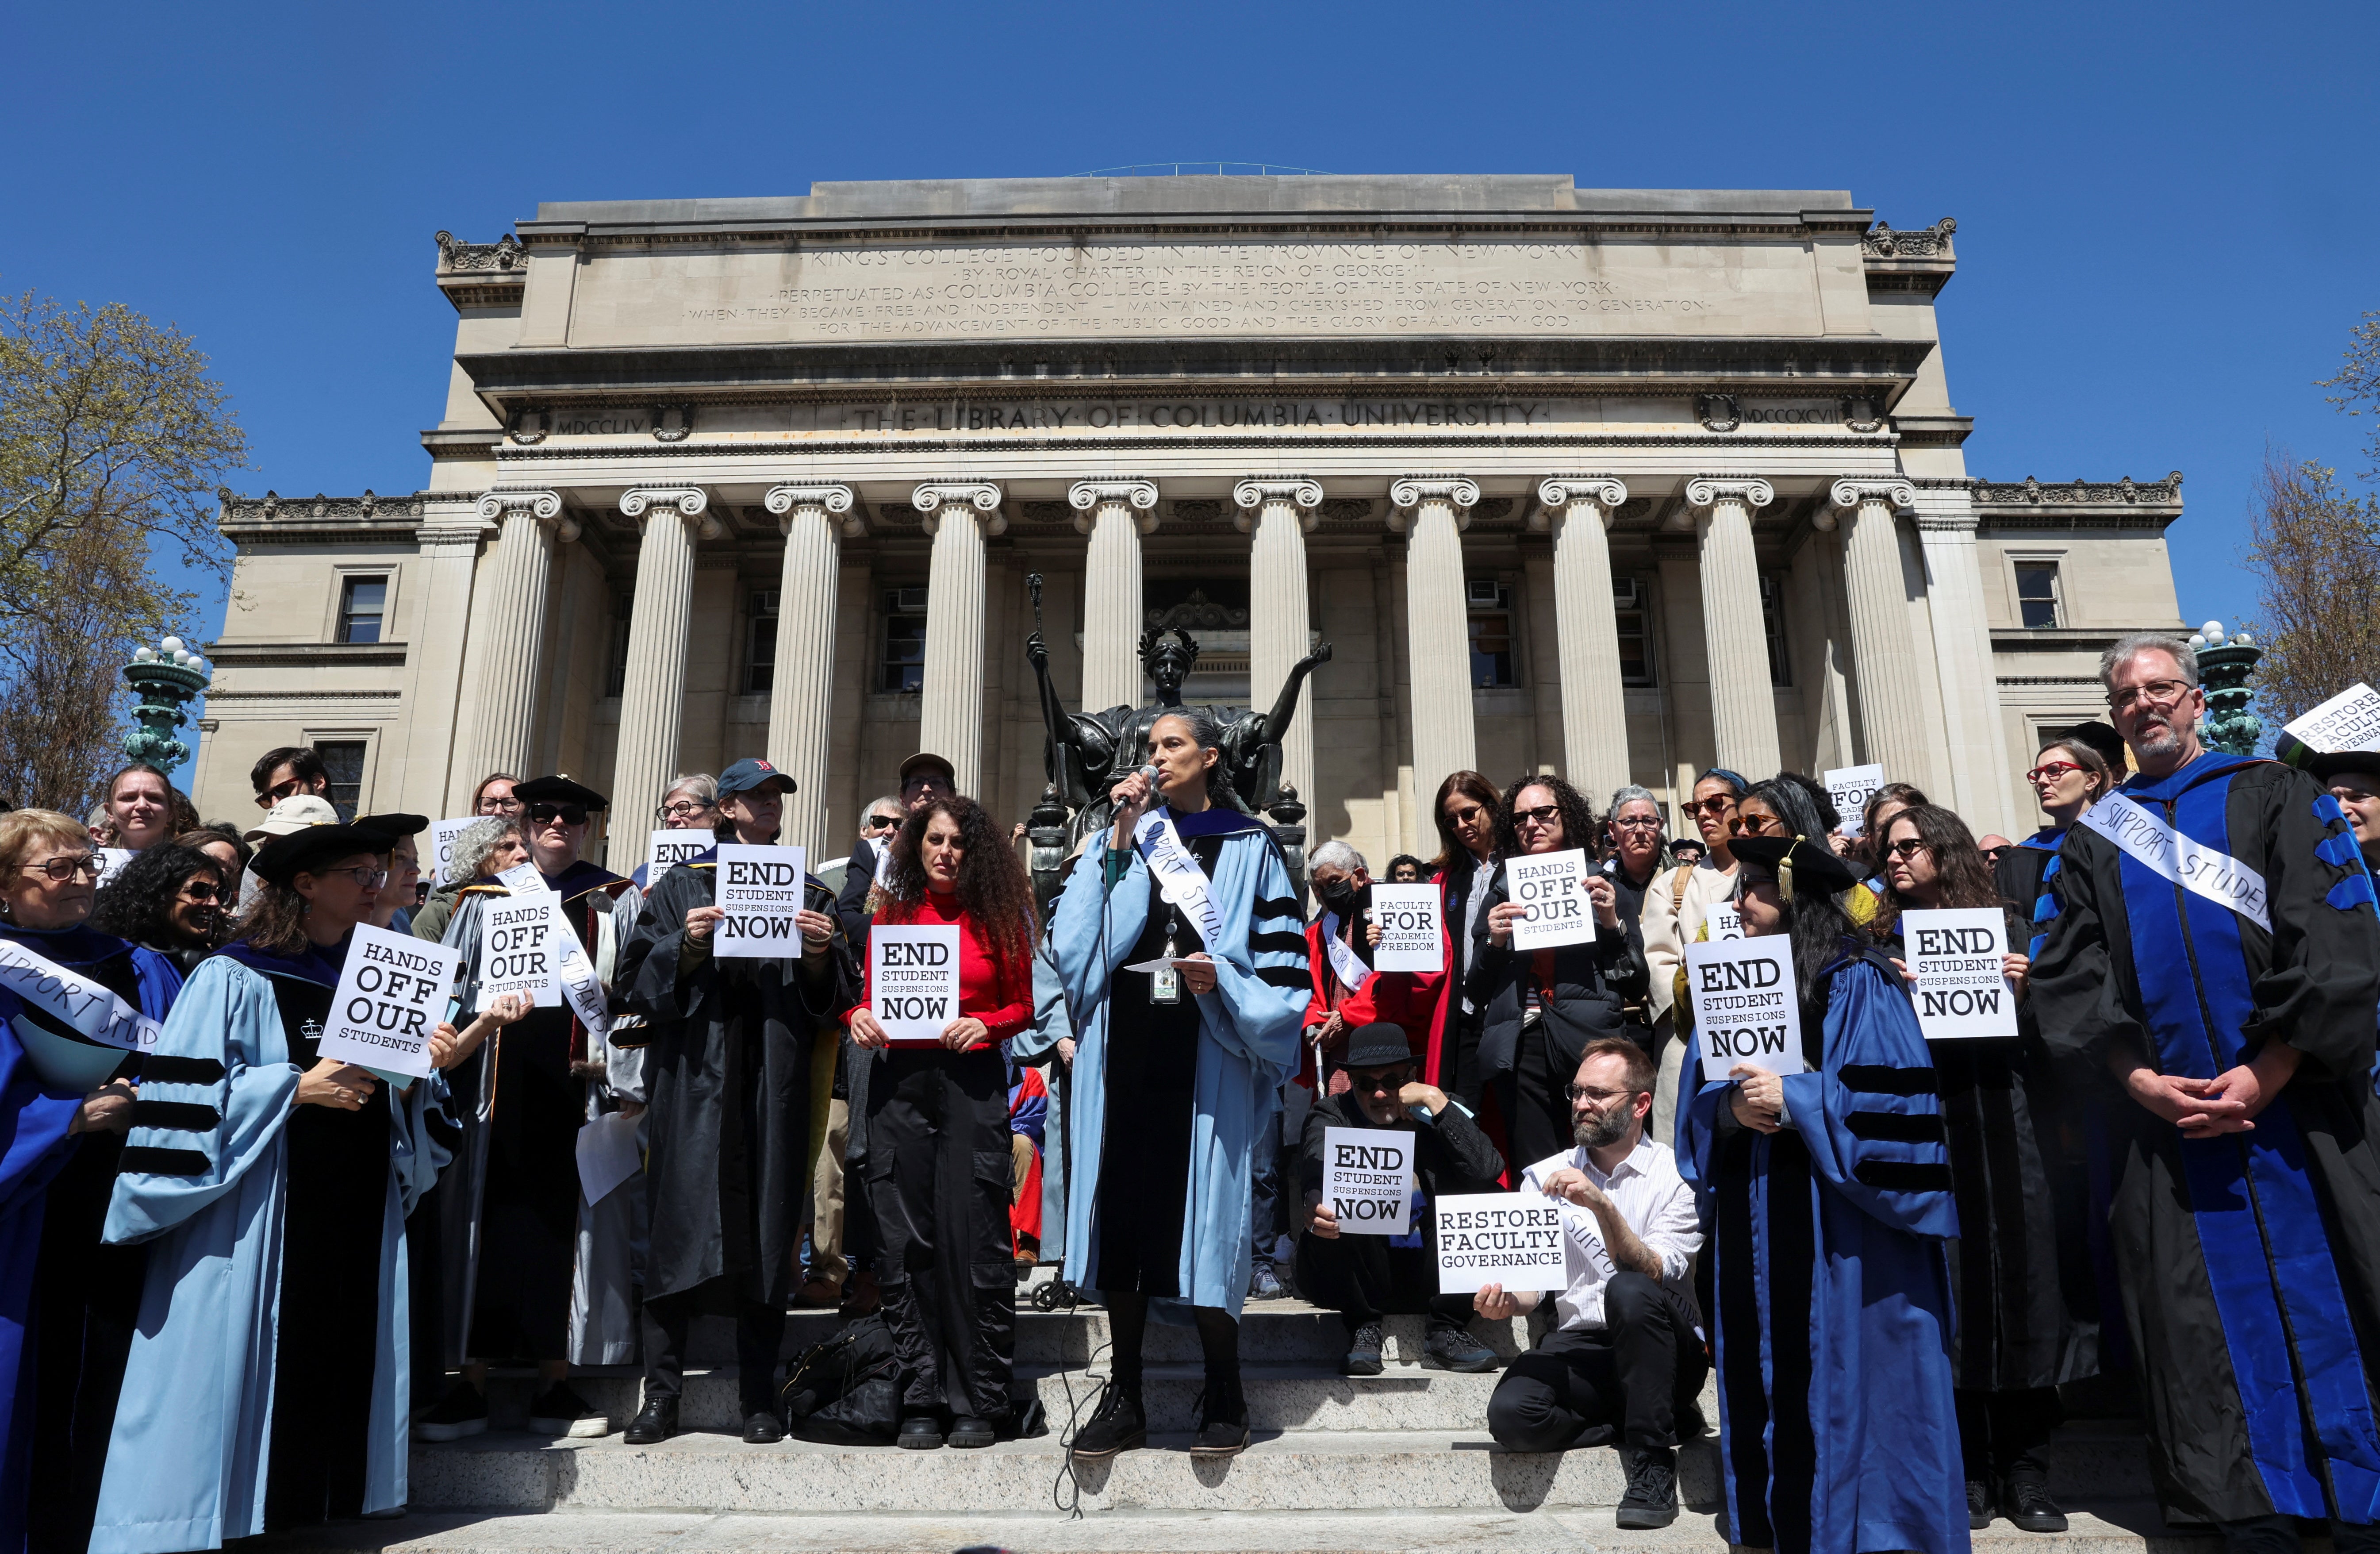 Columbia University faculty members staged a demonstration on Monday, condemning last week’s arrests of some 100 pro-Palestine student protestors